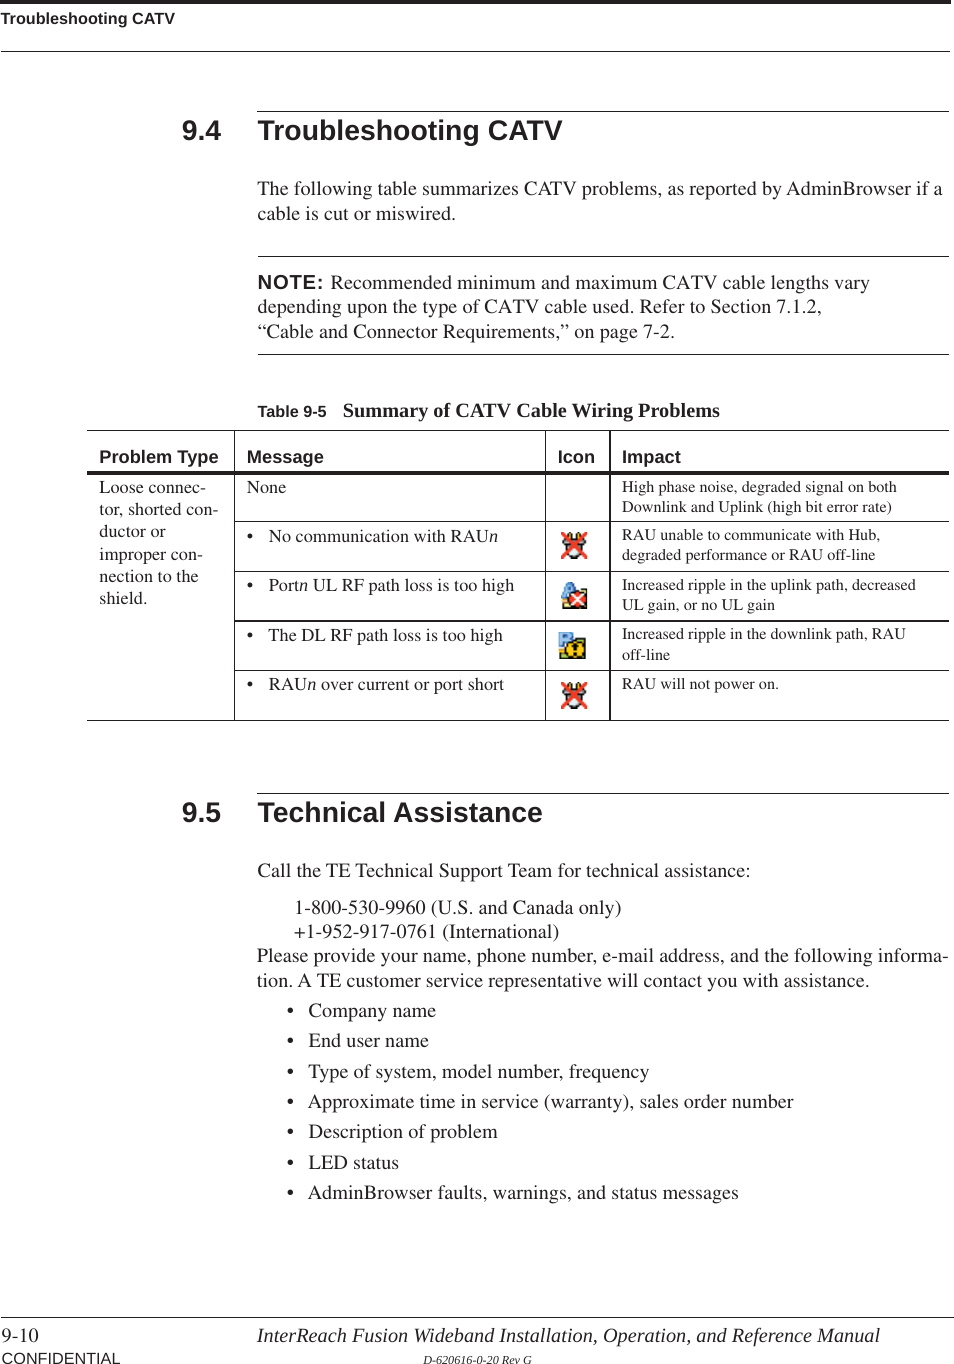 Troubleshooting CATV9-10 InterReach Fusion Wideband Installation, Operation, and Reference Manual CONFIDENTIAL D-620616-0-20 Rev G9.4 Troubleshooting CATVThe following table summarizes CATV problems, as reported by AdminBrowser if a cable is cut or miswired.Table 9-5 Summary of CATV Cable Wiring ProblemsProblem Type Message Icon ImpactLoose connec-tor, shorted con-ductor or improper con-nection to the shield.None High phase noise, degraded signal on both Downlink and Uplink (high bit error rate)• No communication with RAUnRAU unable to communicate with Hub, degraded performance or RAU off-line• Portn UL RF path loss is too high Increased ripple in the uplink path, decreased UL gain, or no UL gain• The DL RF path loss is too high Increased ripple in the downlink path, RAU off-line•RAUn over current or port short RAU will not power on.NOTE: Recommended minimum and maximum CATV cable lengths vary depending upon the type of CATV cable used. Refer to Section 7.1.2, “Cable and Connector Requirements,” on page 7-2.9.5 Technical AssistanceCall the TE Technical Support Team for technical assistance:1-800-530-9960 (U.S. and Canada only) +1-952-917-0761 (International) Please provide your name, phone number, e-mail address, and the following informa-tion. A TE customer service representative will contact you with assistance.• Company name• End user name• Type of system, model number, frequency• Approximate time in service (warranty), sales order number• Description of problem• LED status• AdminBrowser faults, warnings, and status messages